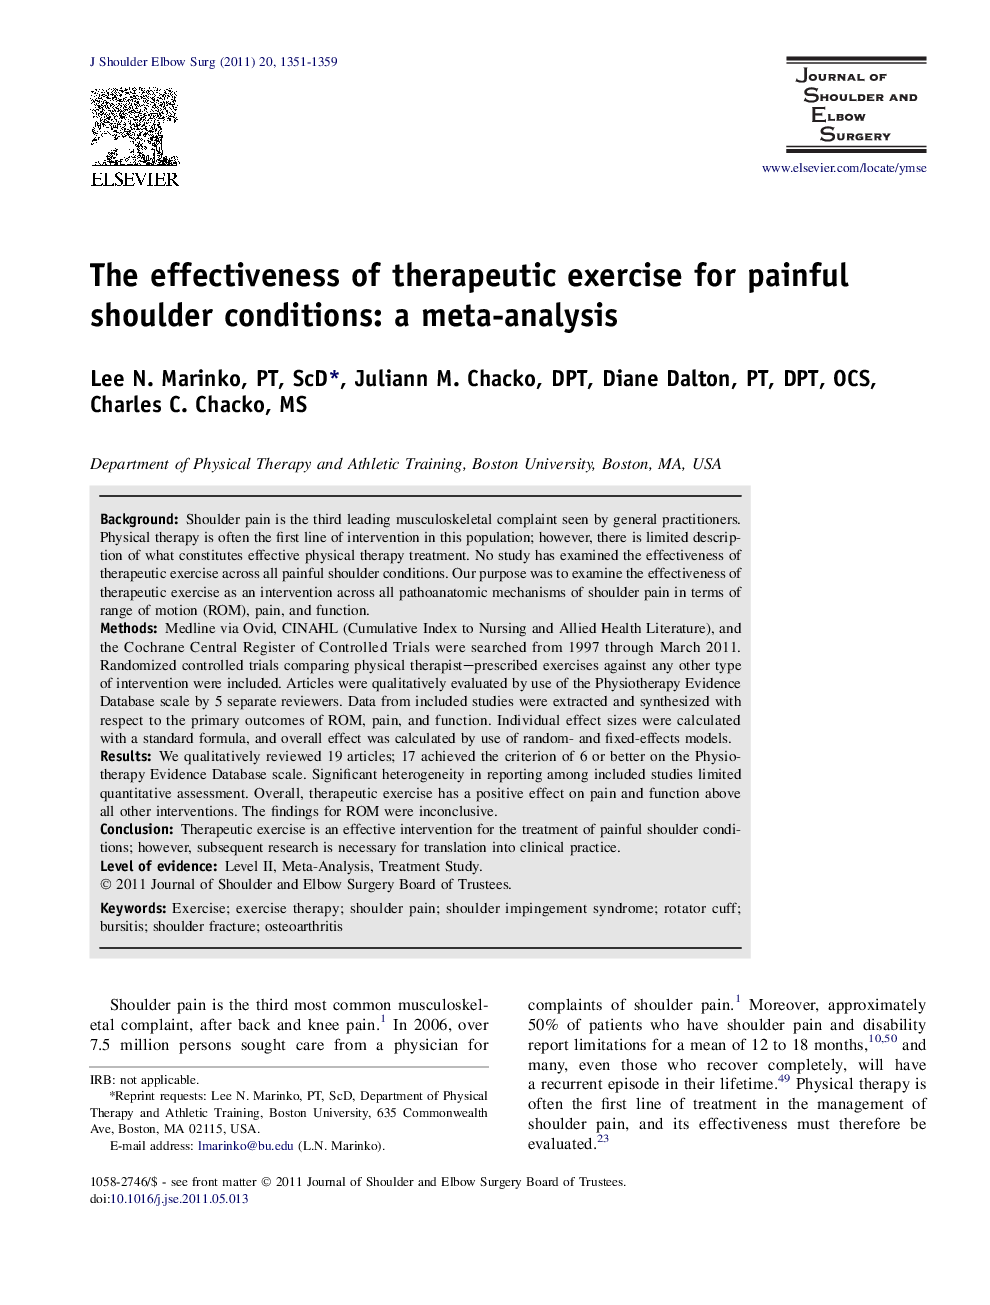 The effectiveness of therapeutic exercise for painful shoulder conditions: a meta-analysis 